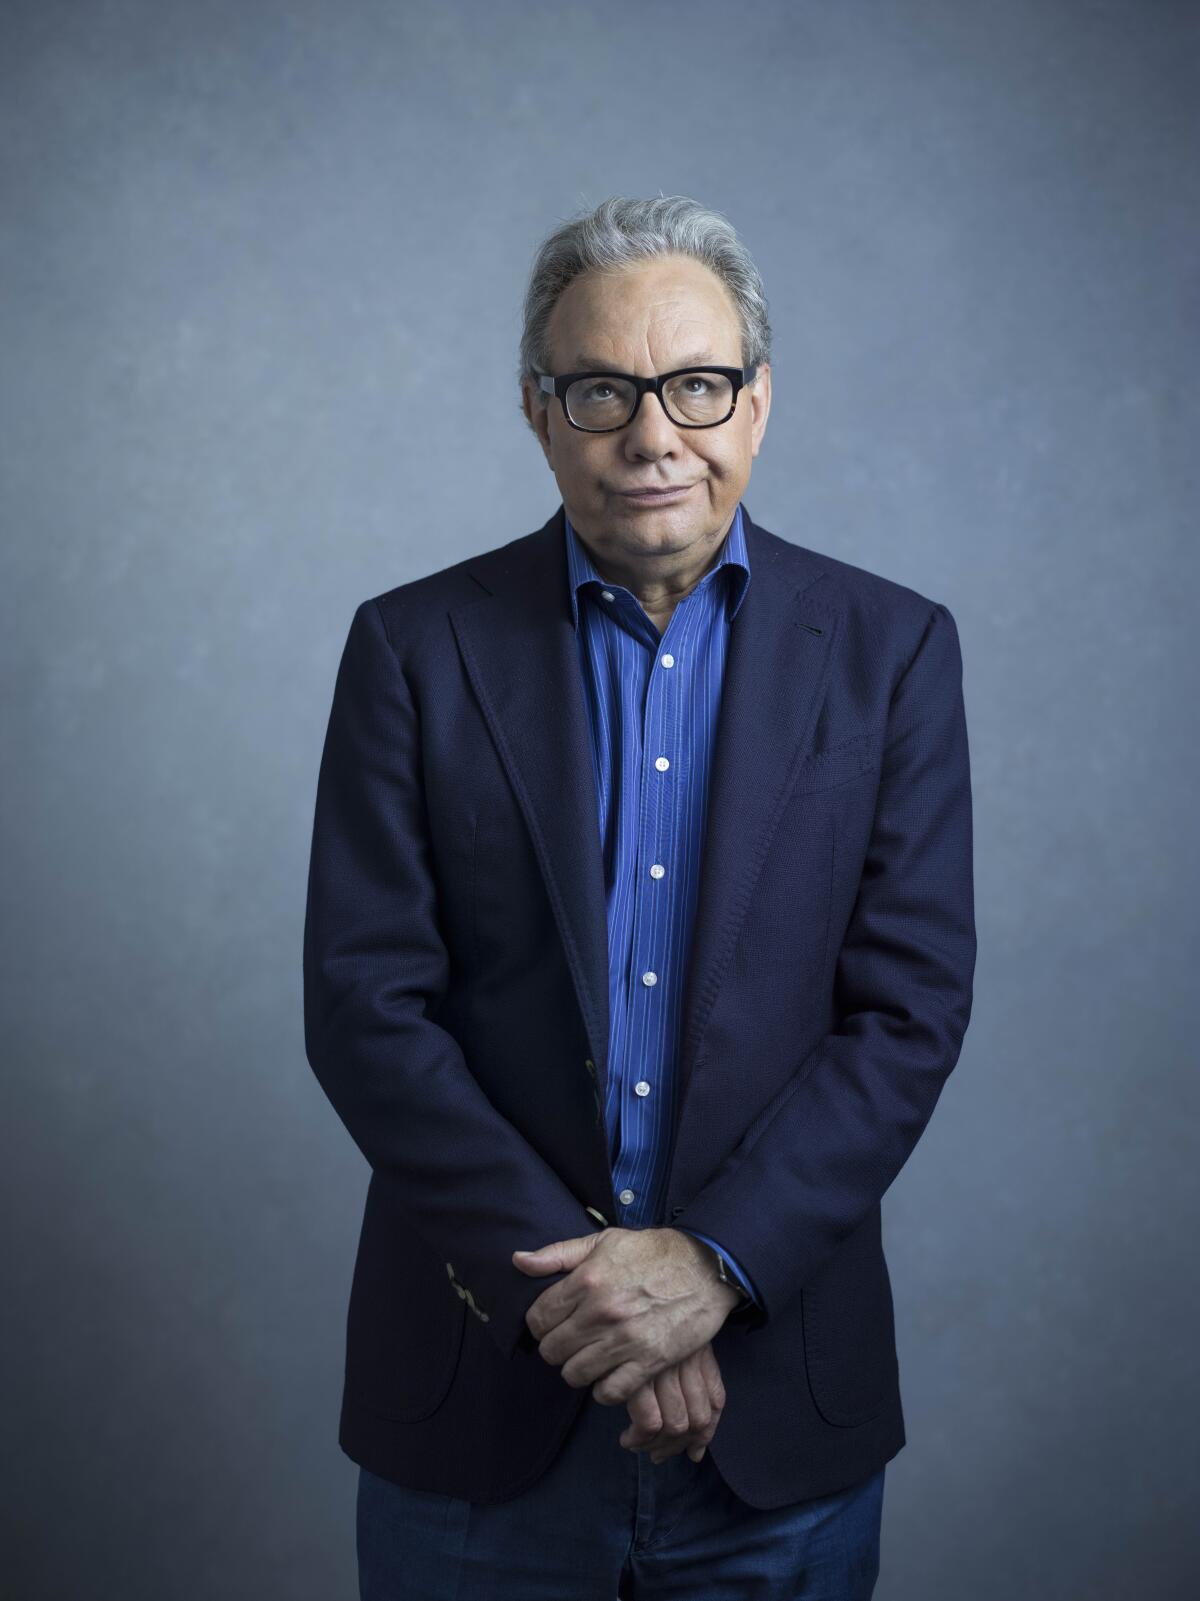 Lewis Black prepares to take the stage and unleash his rage one last time in during his "Goodbye Yeller Brick Road" tour